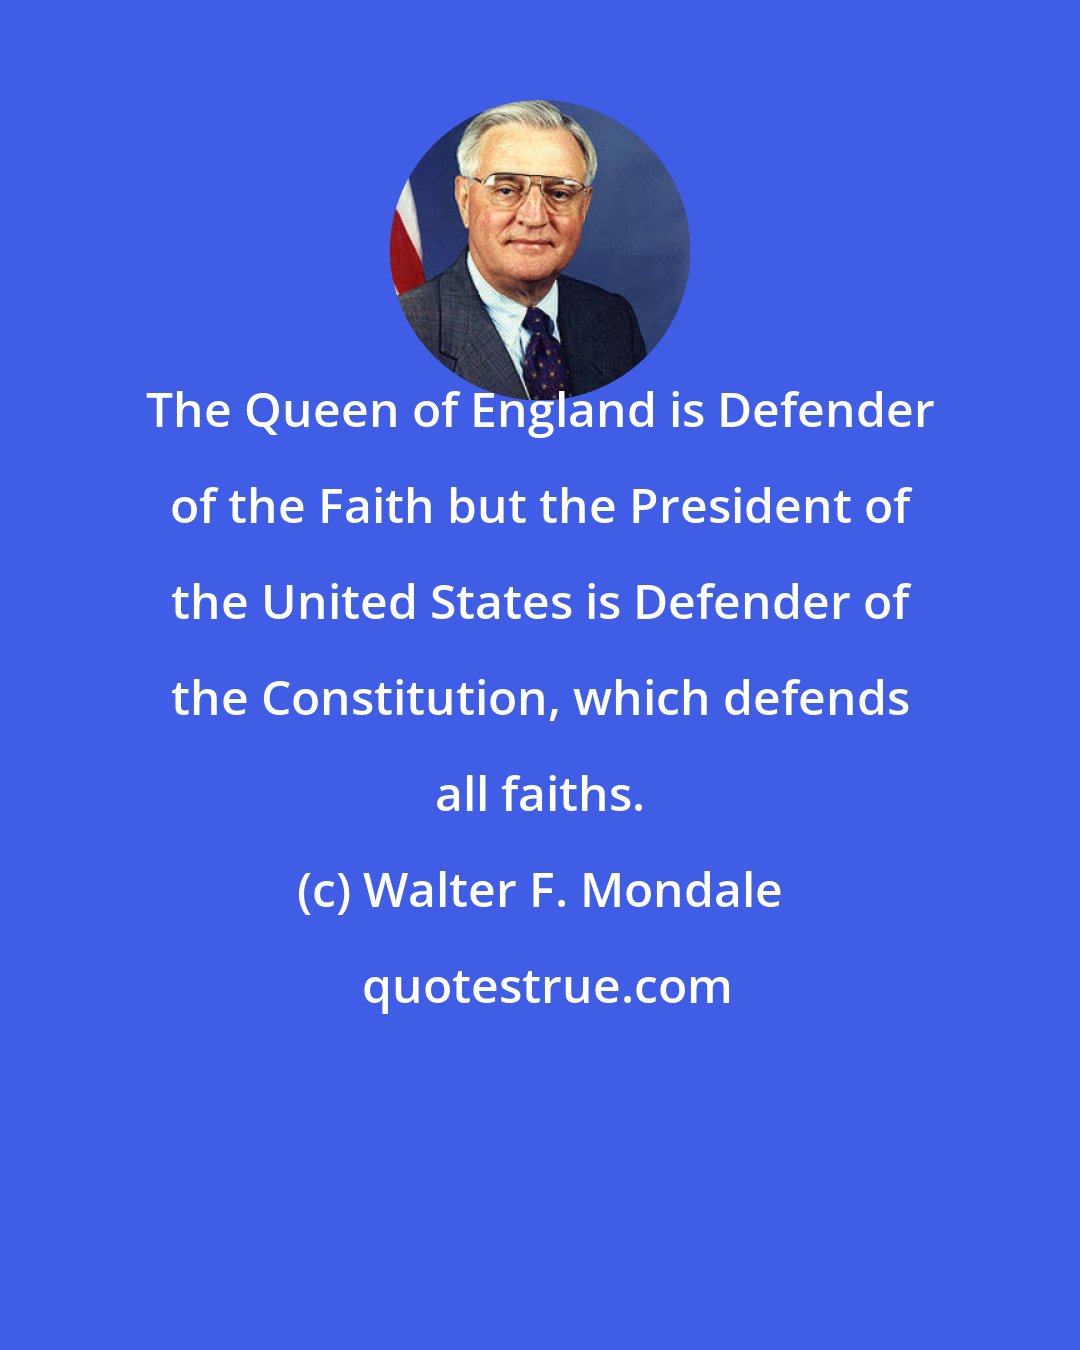 Walter F. Mondale: The Queen of England is Defender of the Faith but the President of the United States is Defender of the Constitution, which defends all faiths.